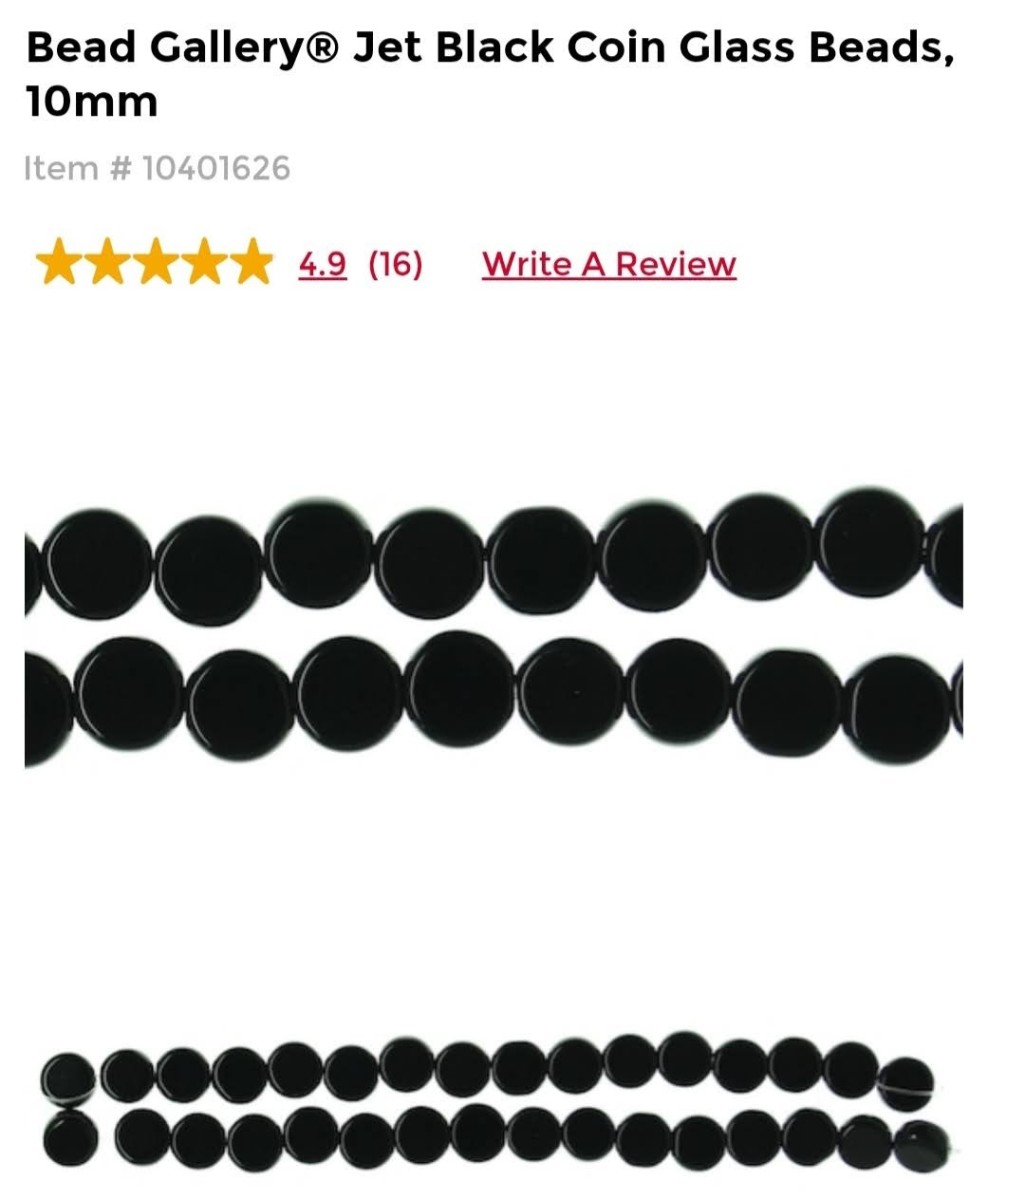 Bead Gallery Jet Black Coin Glass Beads 10mm